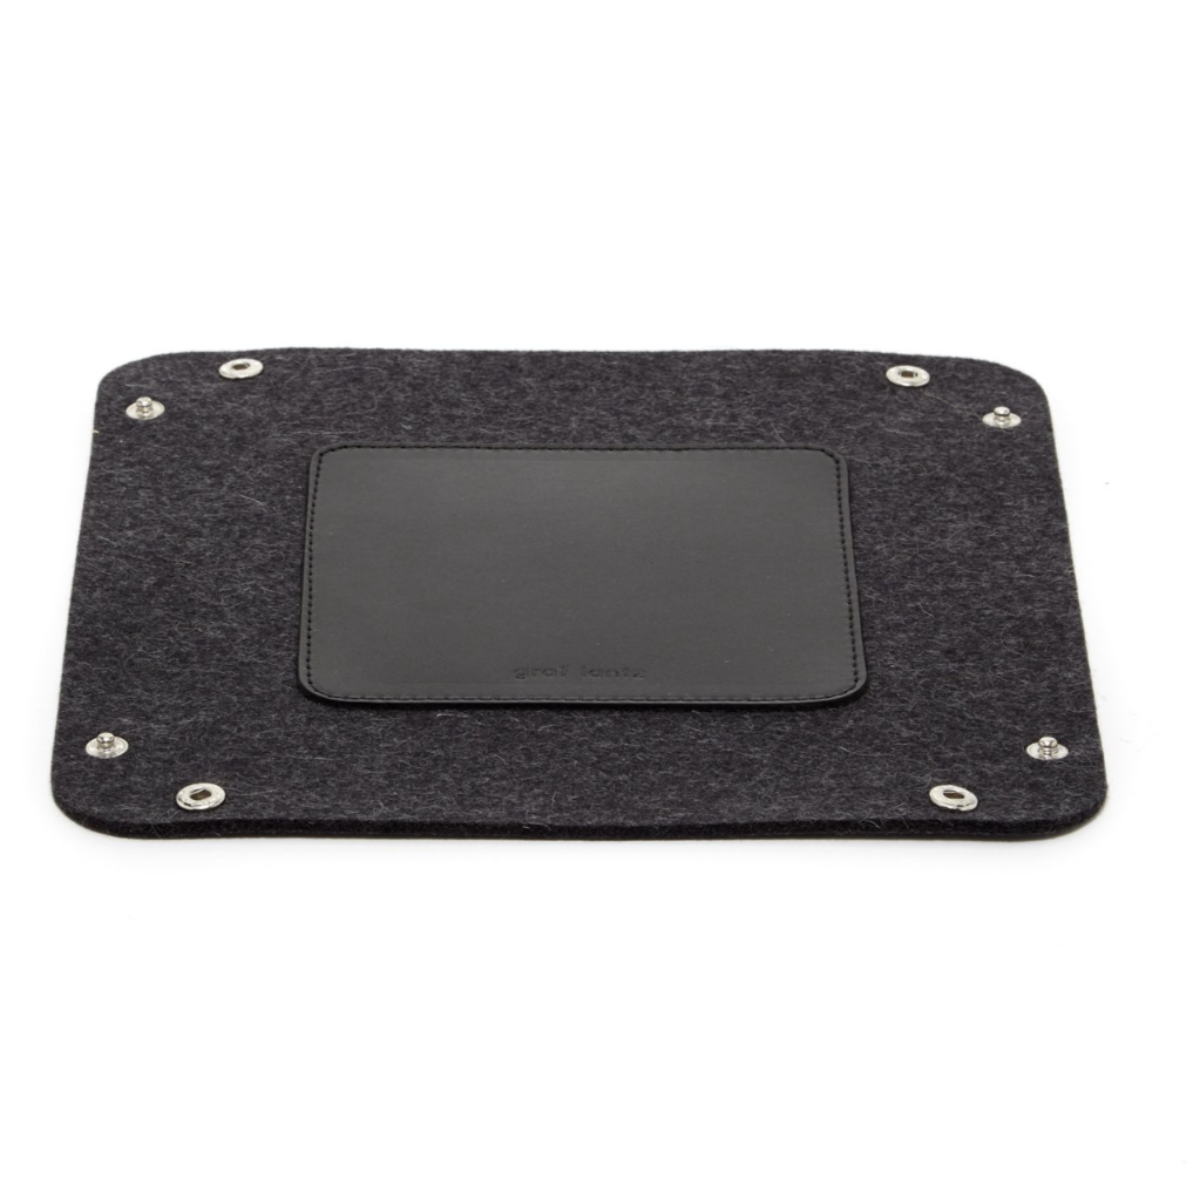 Valet Tray in Black Leather and Merino Wool Felt